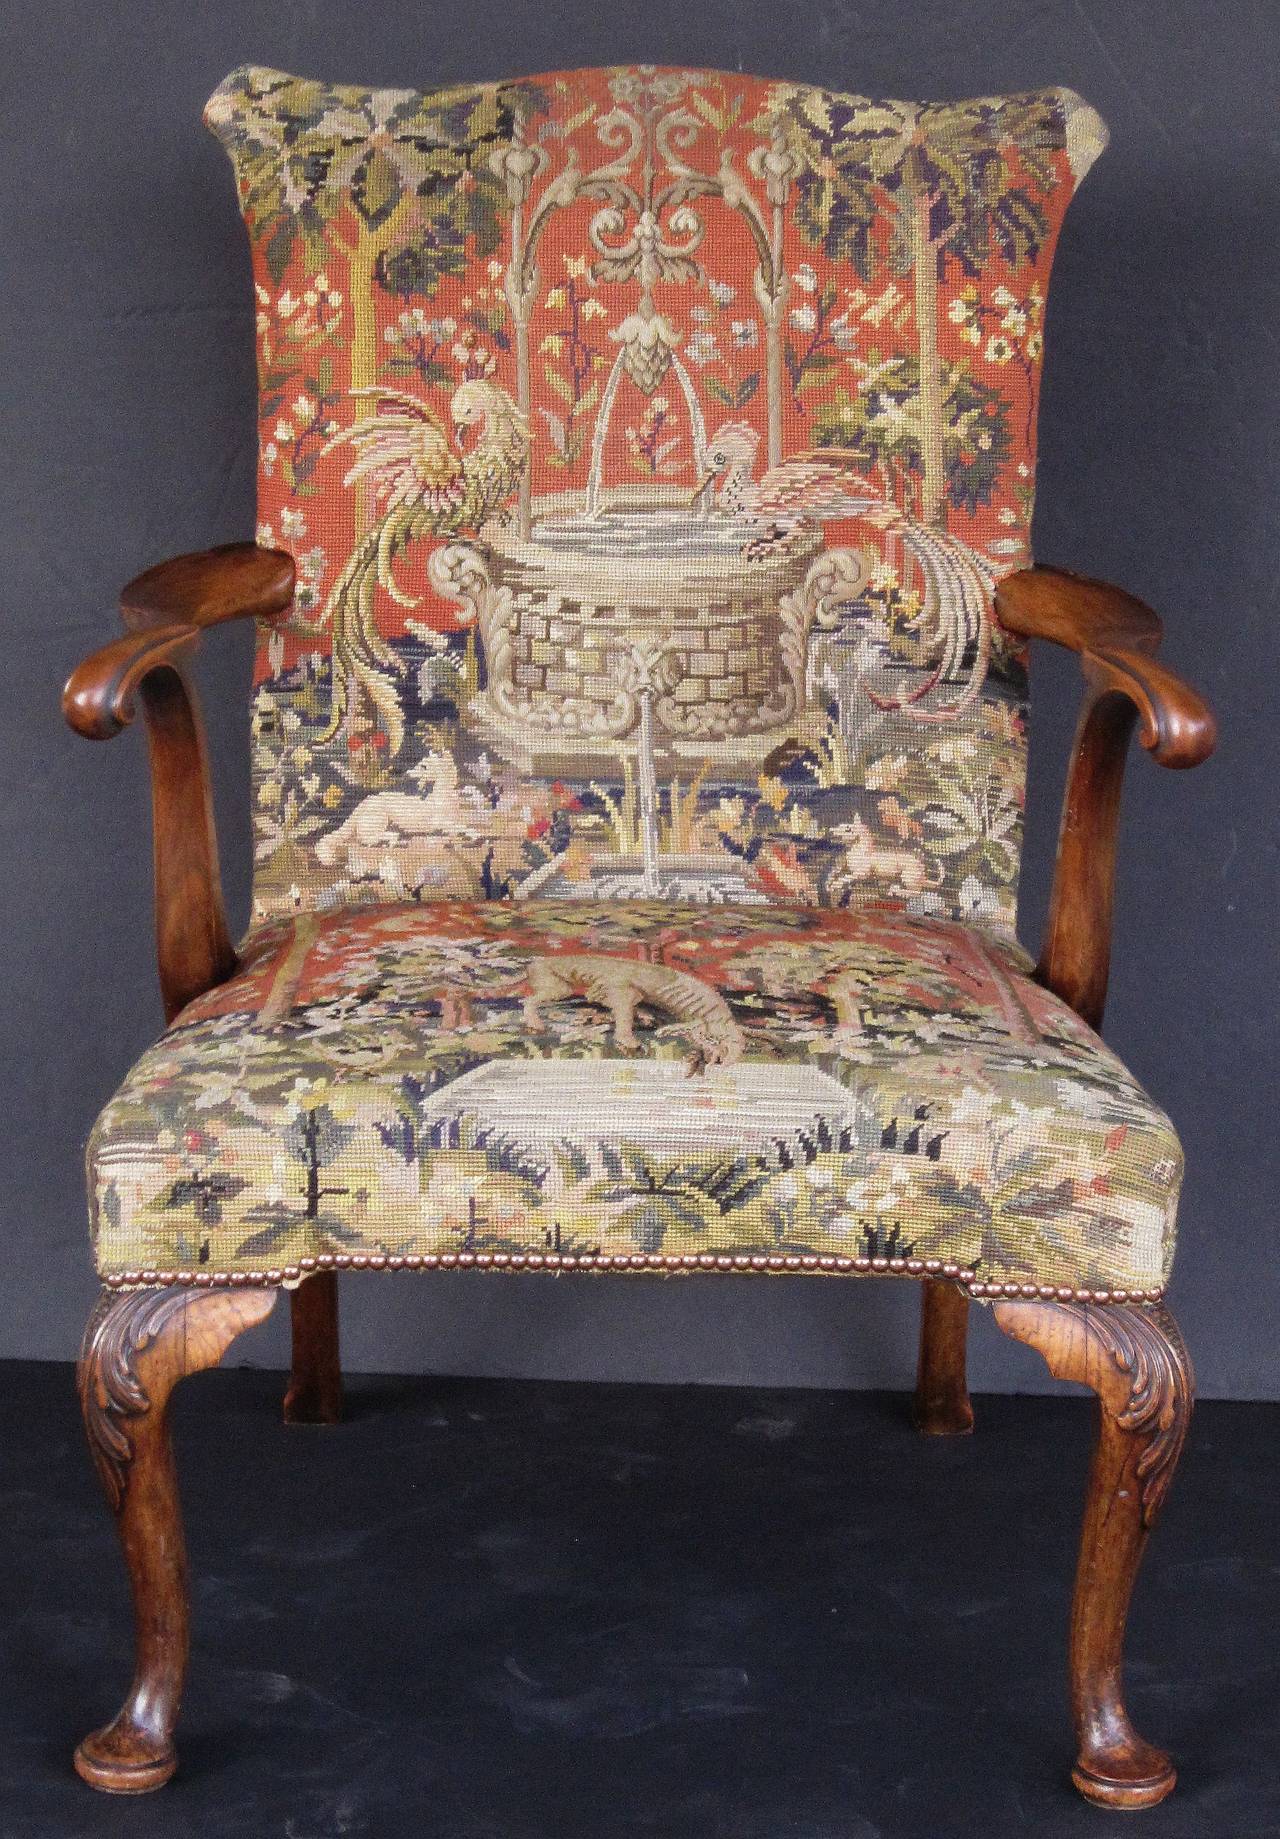 A handsome large English open armchair in the Gainsborough style, featuring a decorative needlepoint tapestry upholstered over a walnut frame, stylish serpentine arms and carved cabriole legs.

H 38 3/4